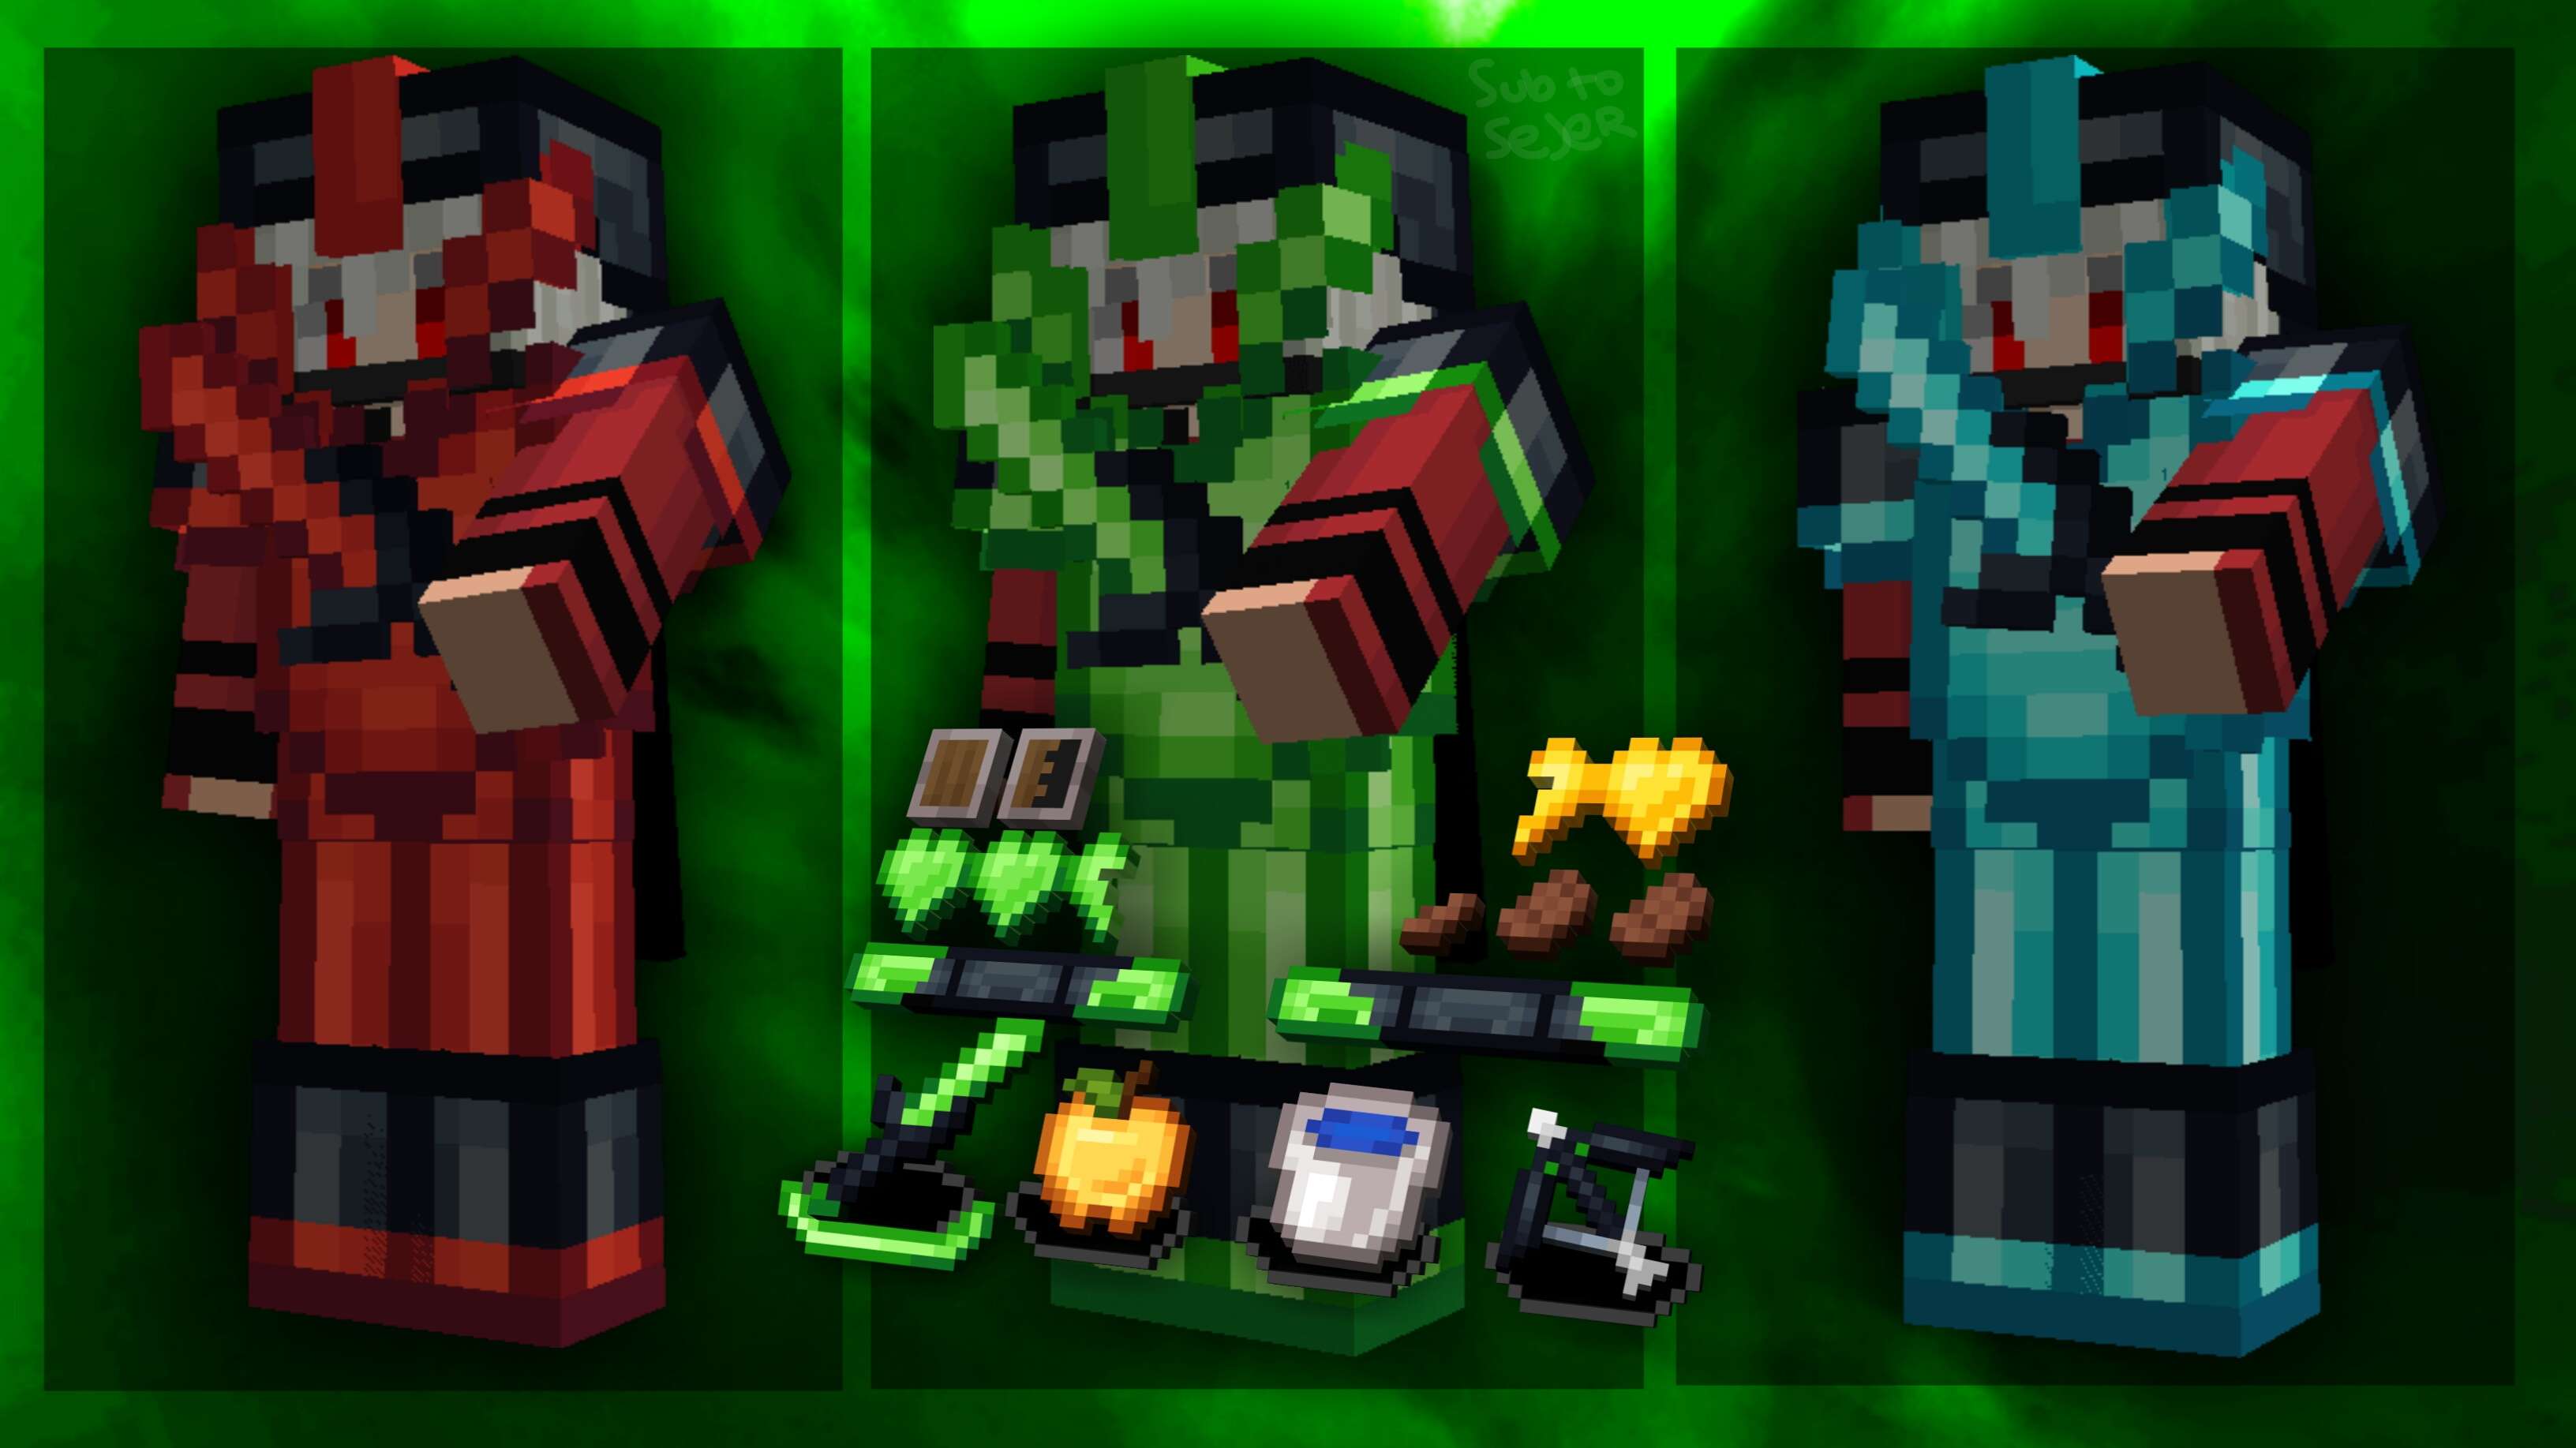 Hason (Green) 16x by SpacyLmao on PvPRP